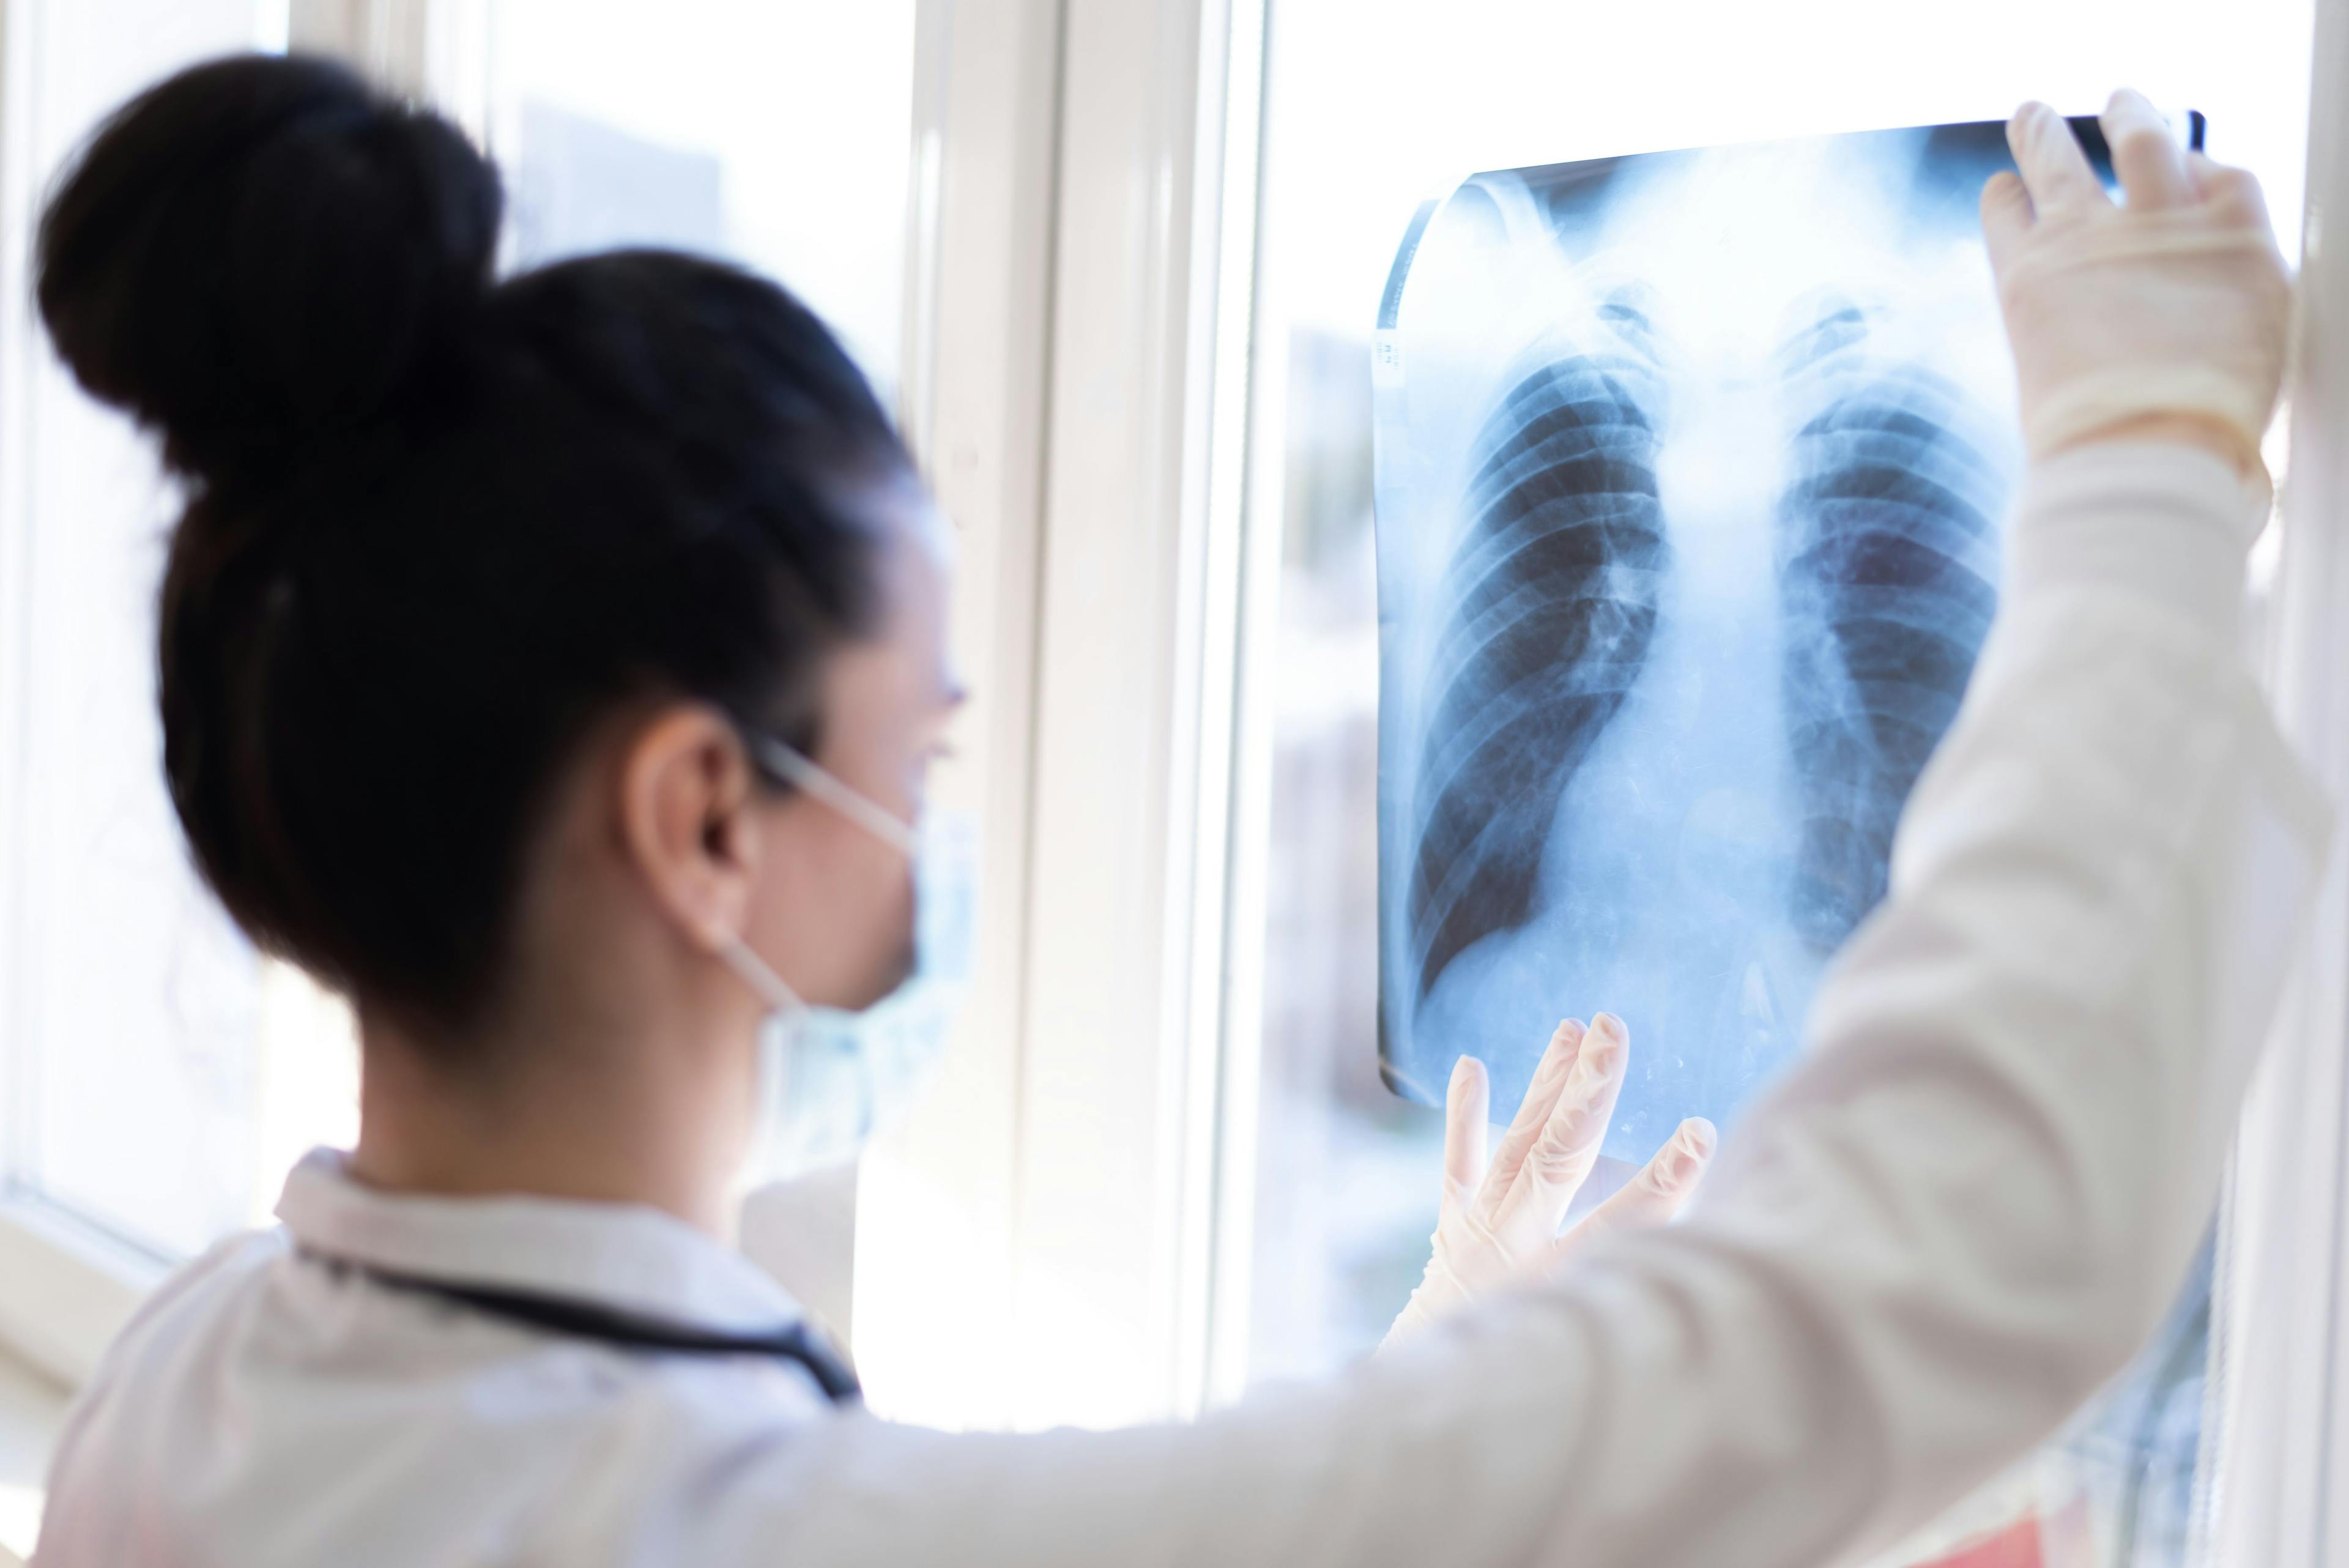 Health care worker looking at lung x-ray